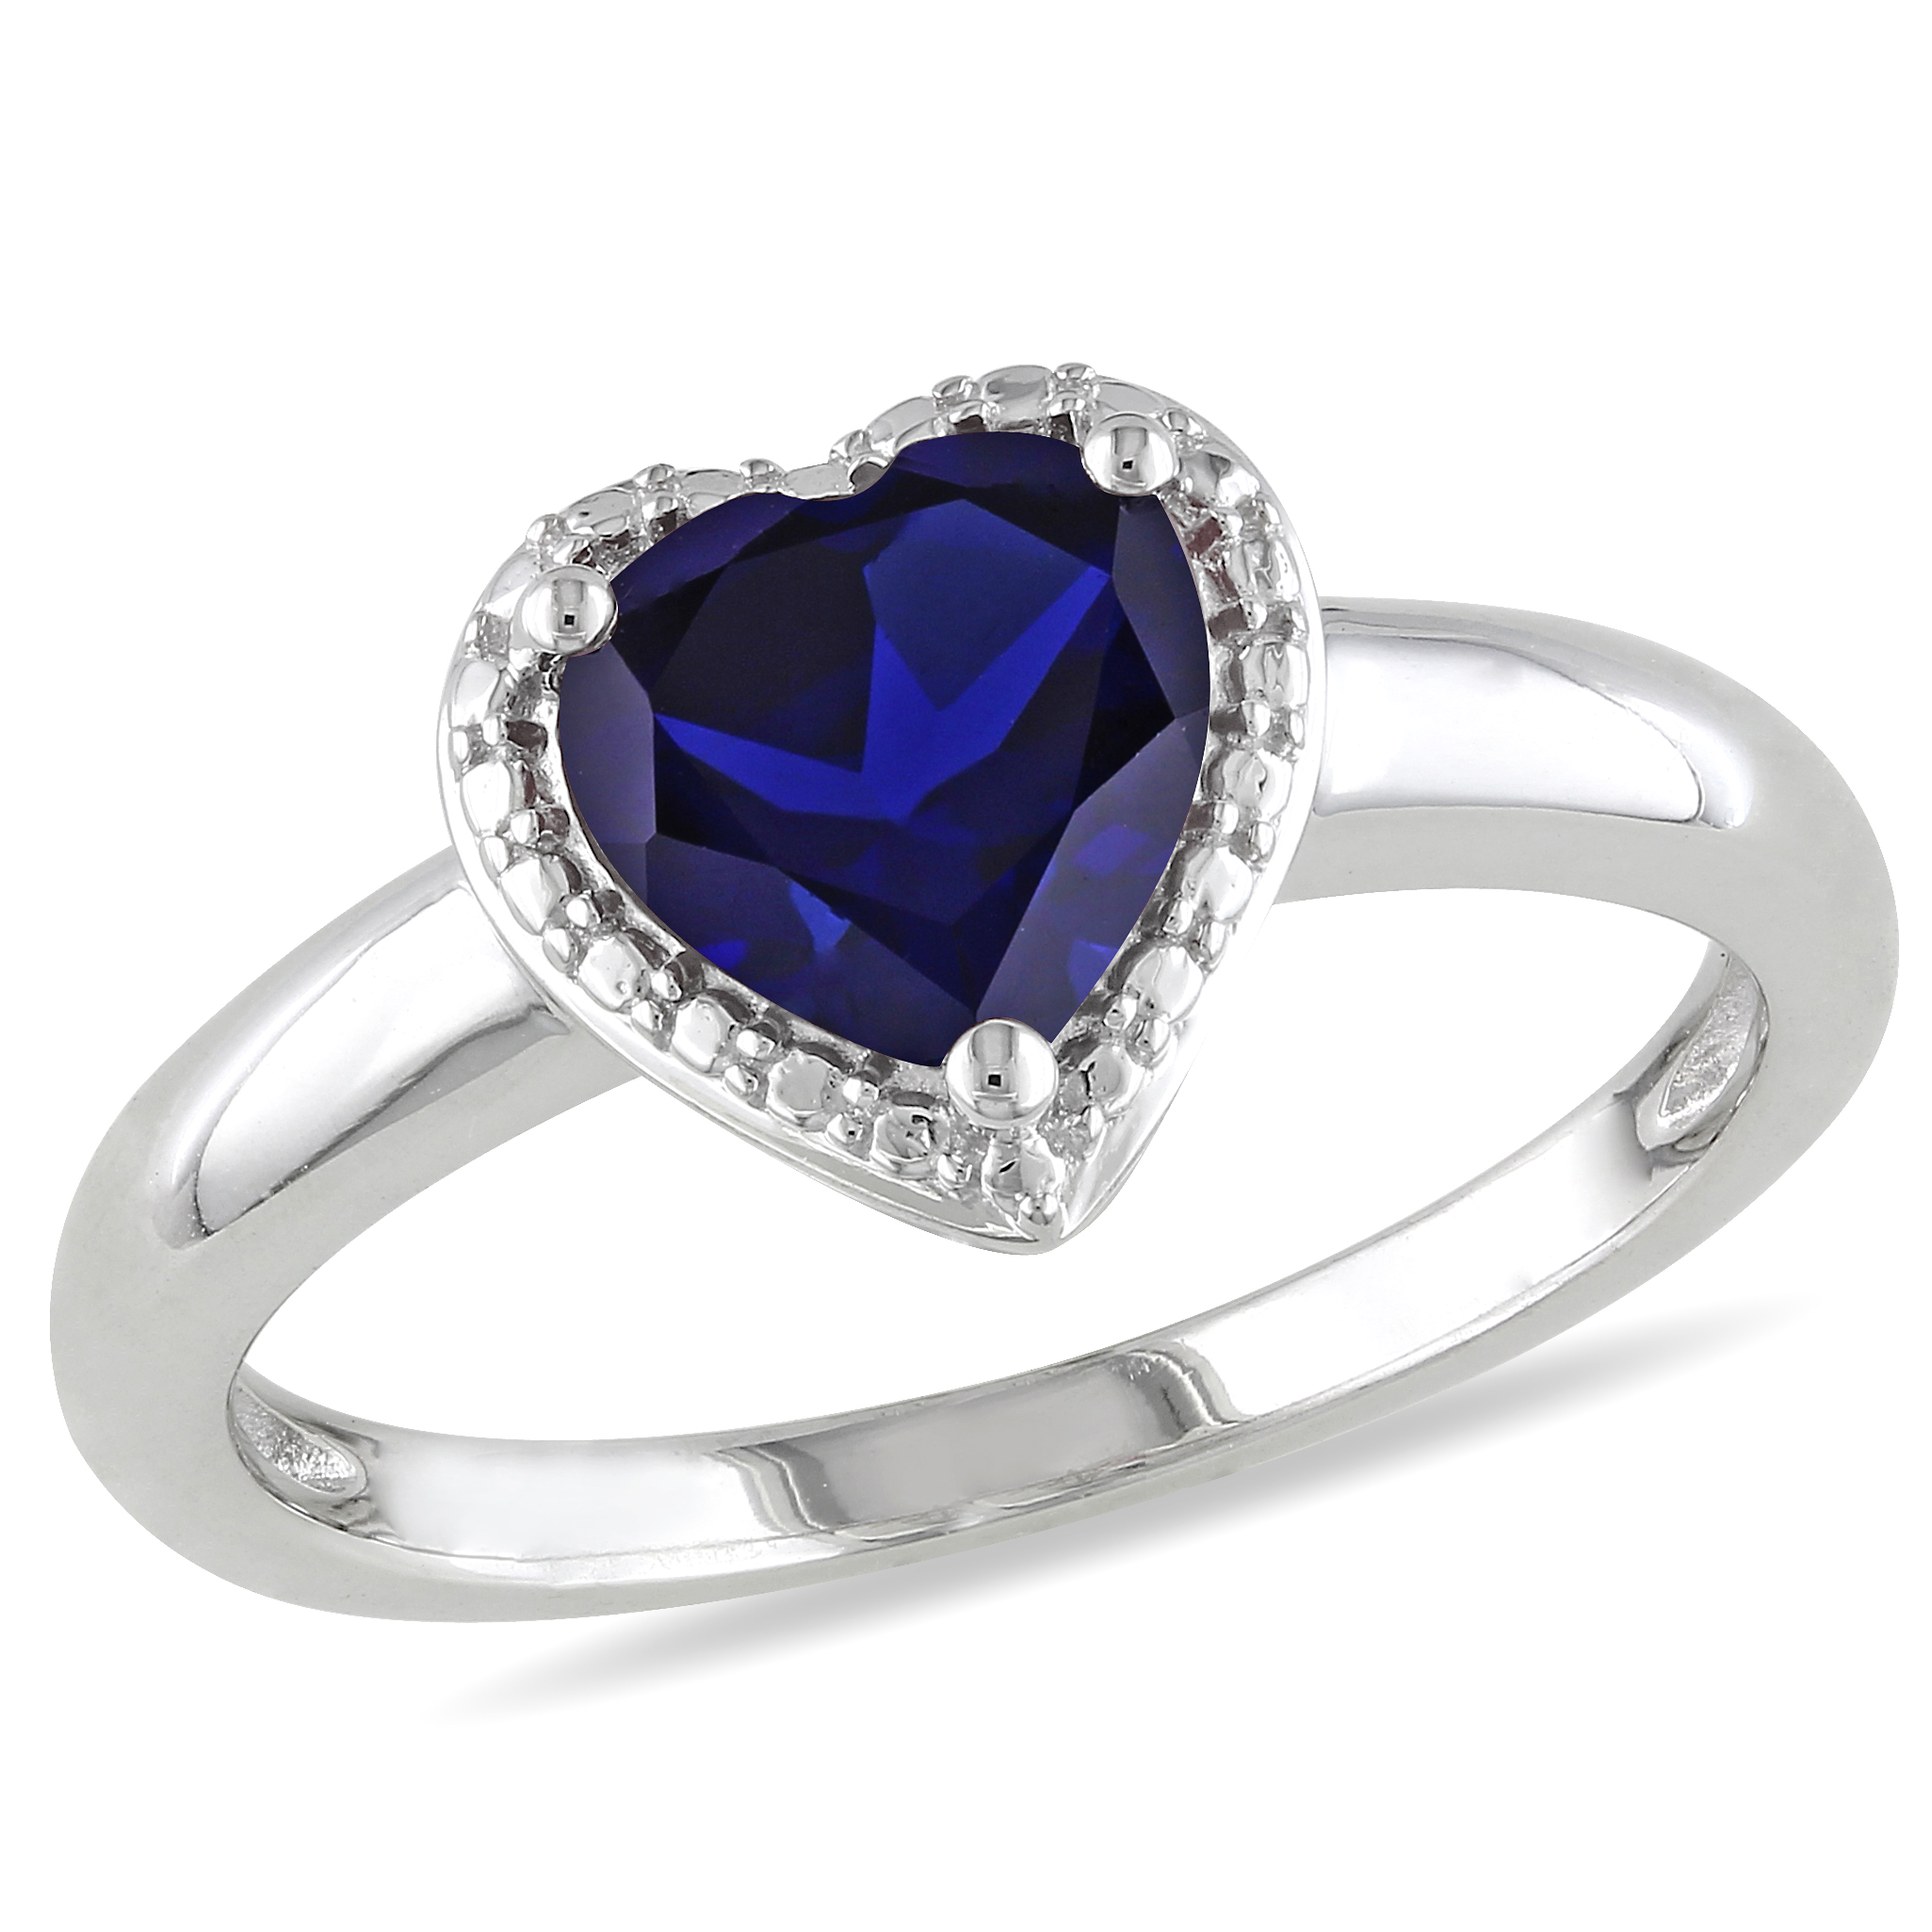 Amour 1 7/8 Carat T.G.W. Created Sapphire Heart Ring in Sterling Silver